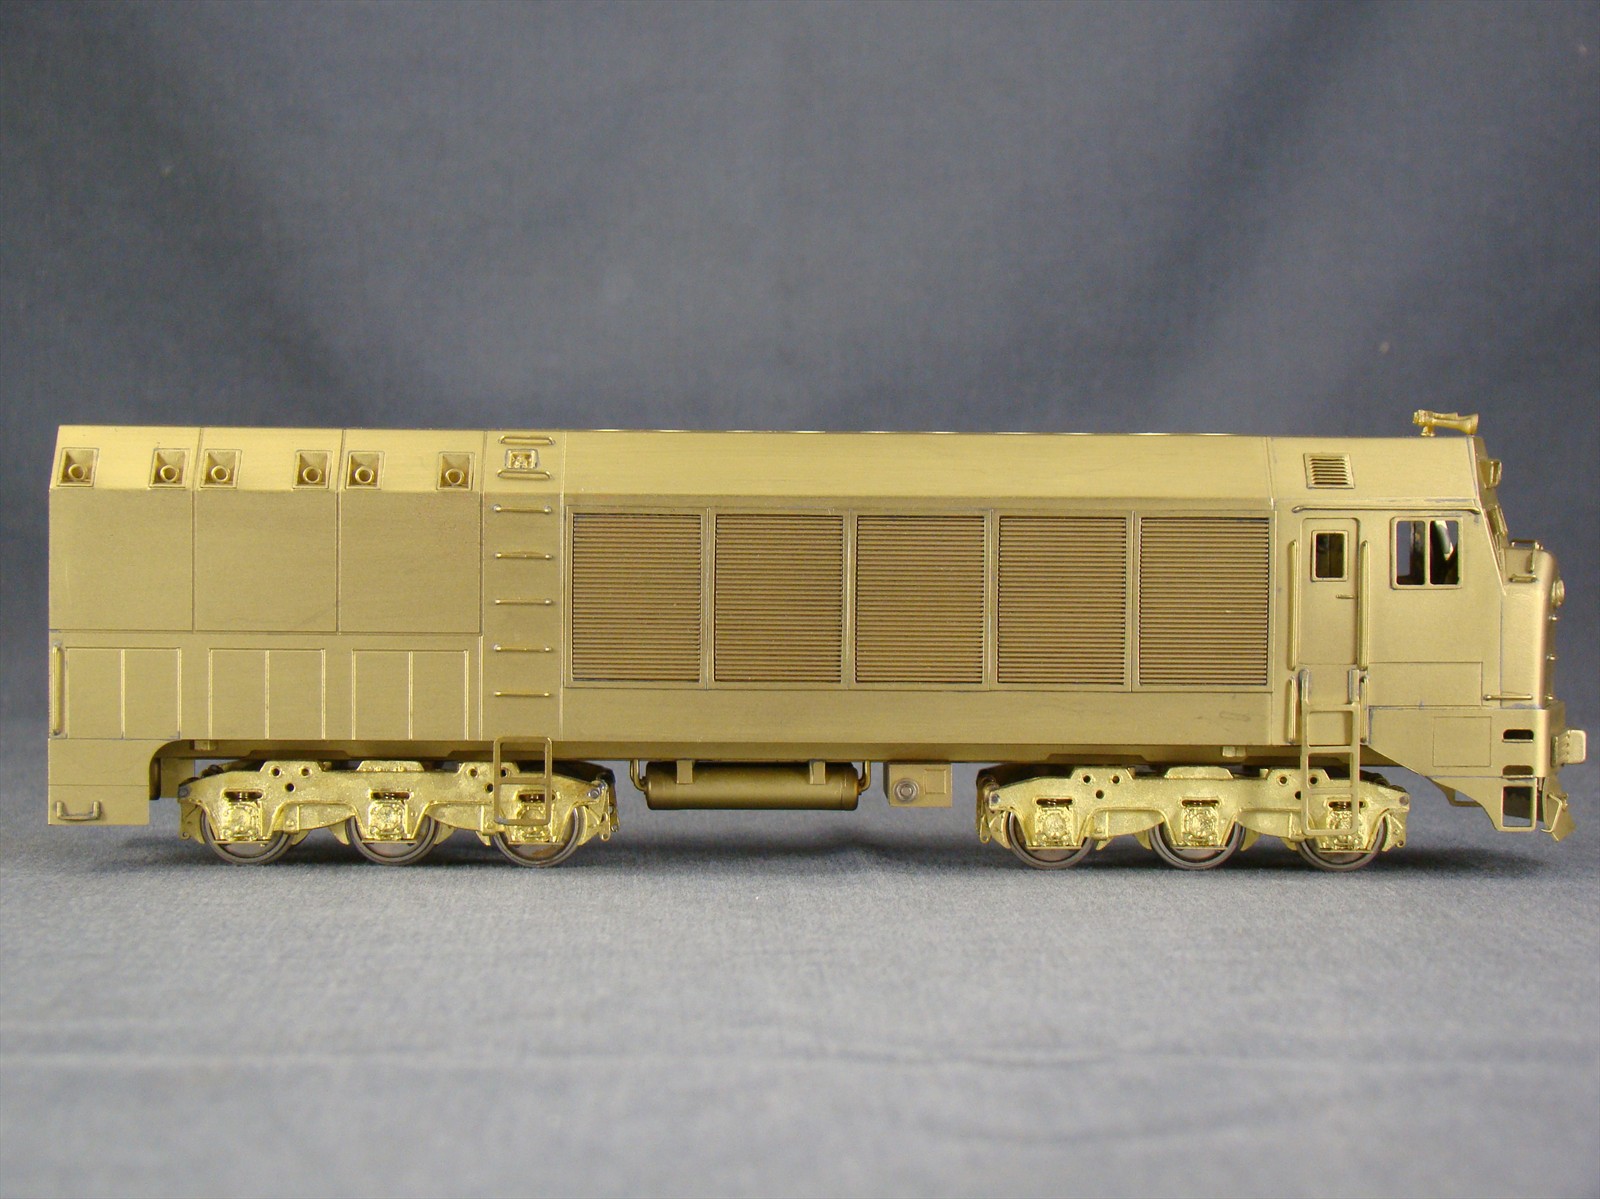 ACE Model
        "Support Unit" Engineer's Side View